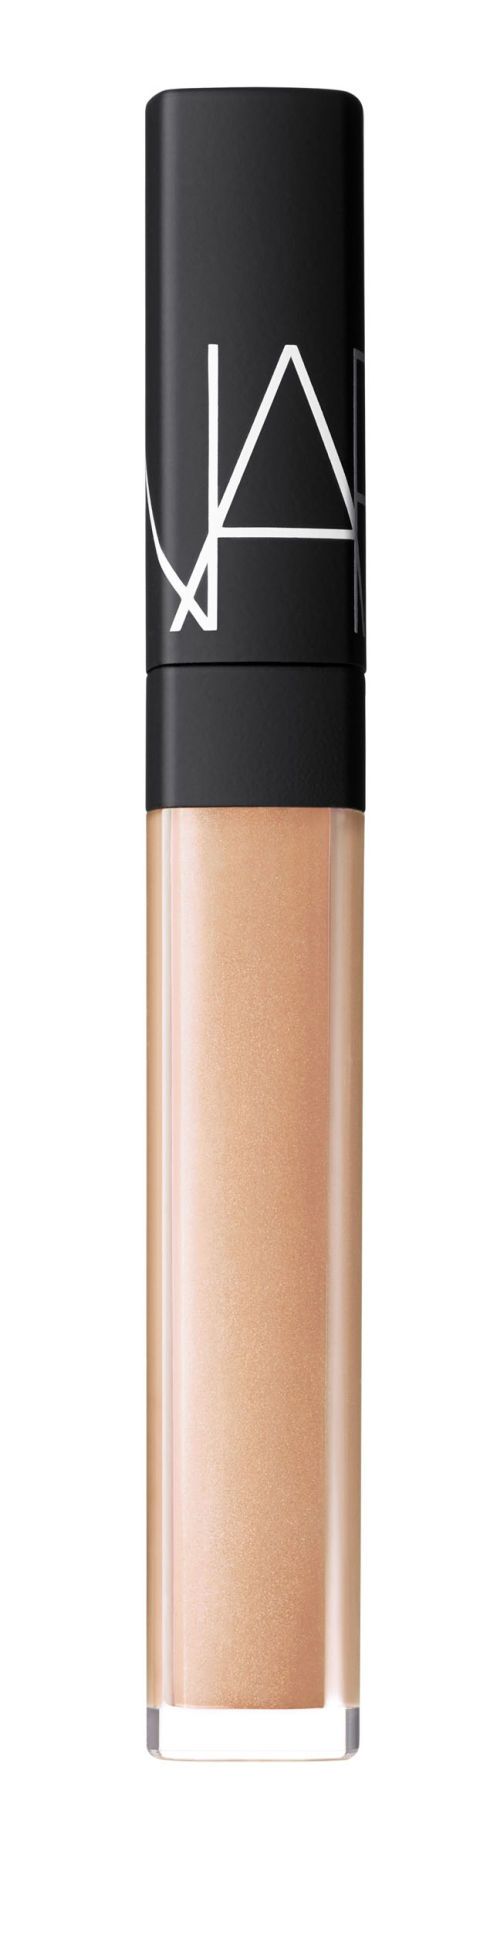 Brown, Peach, Tints and shades, Tan, Beige, Maroon, Material property, Cylinder, Cosmetics, Lipstick, 